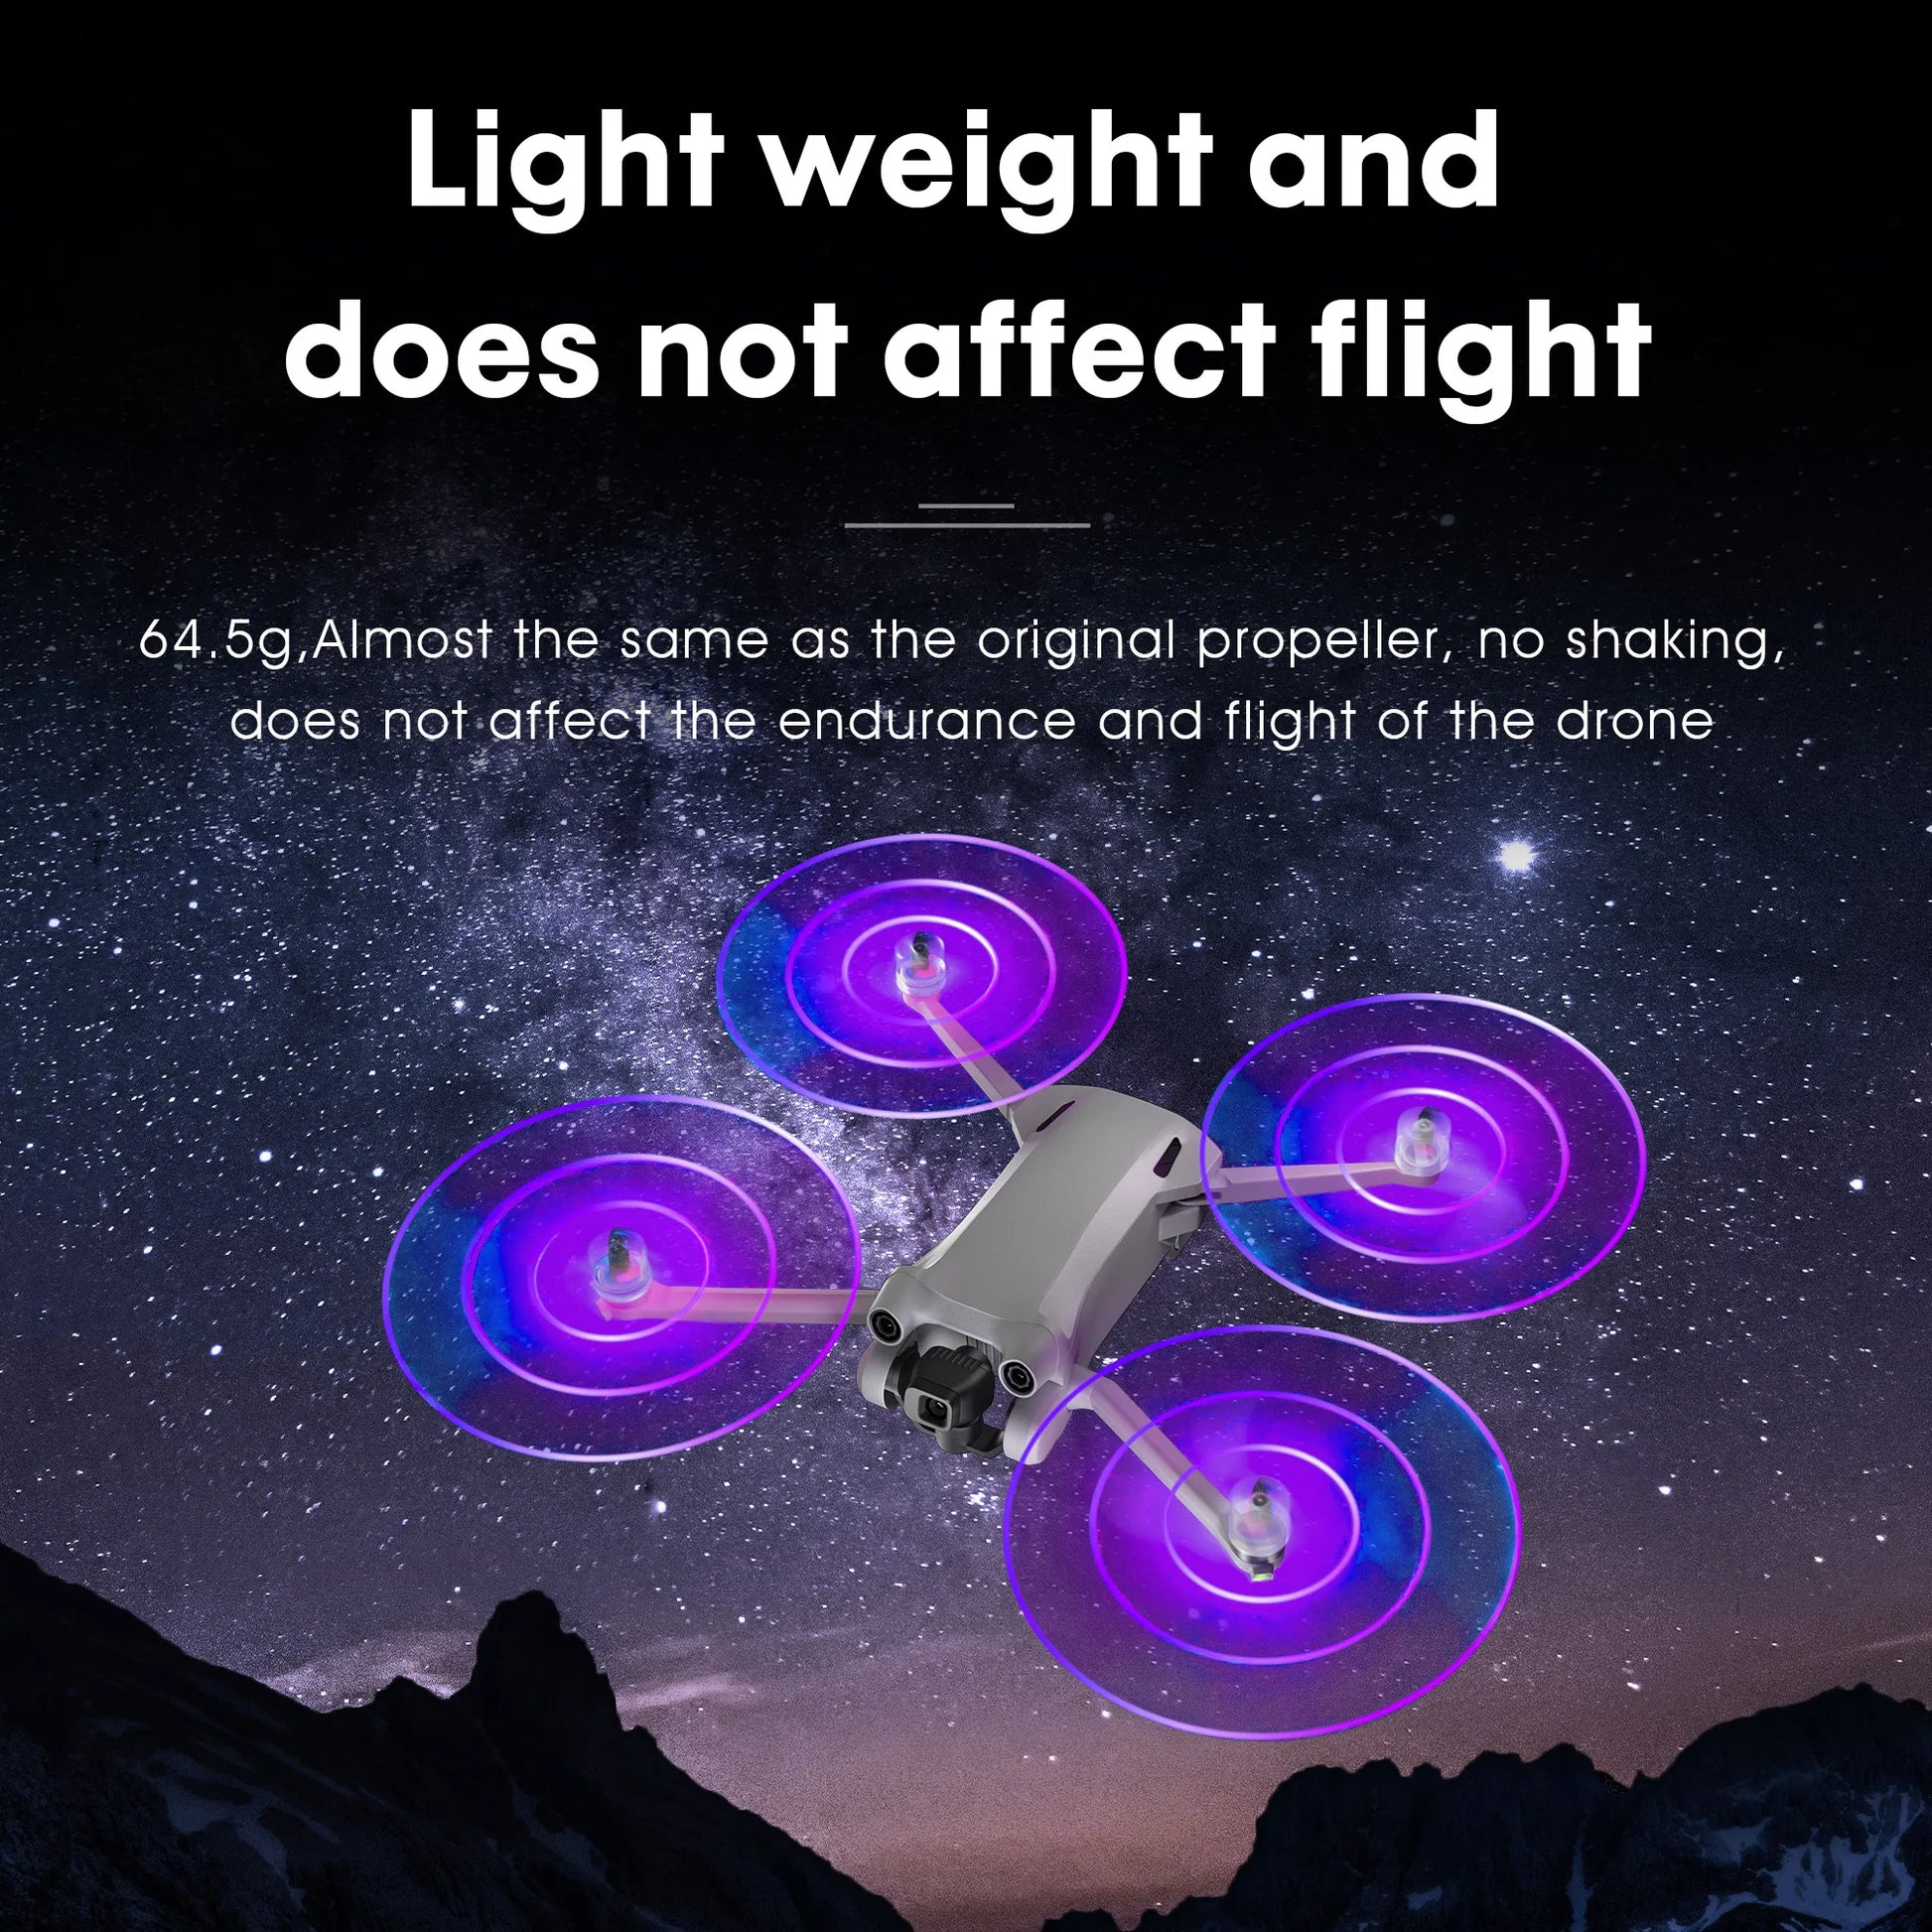 LED Light Flash Propeller, light weight and does not affect flight 64,5g, almost the same as the original propeller